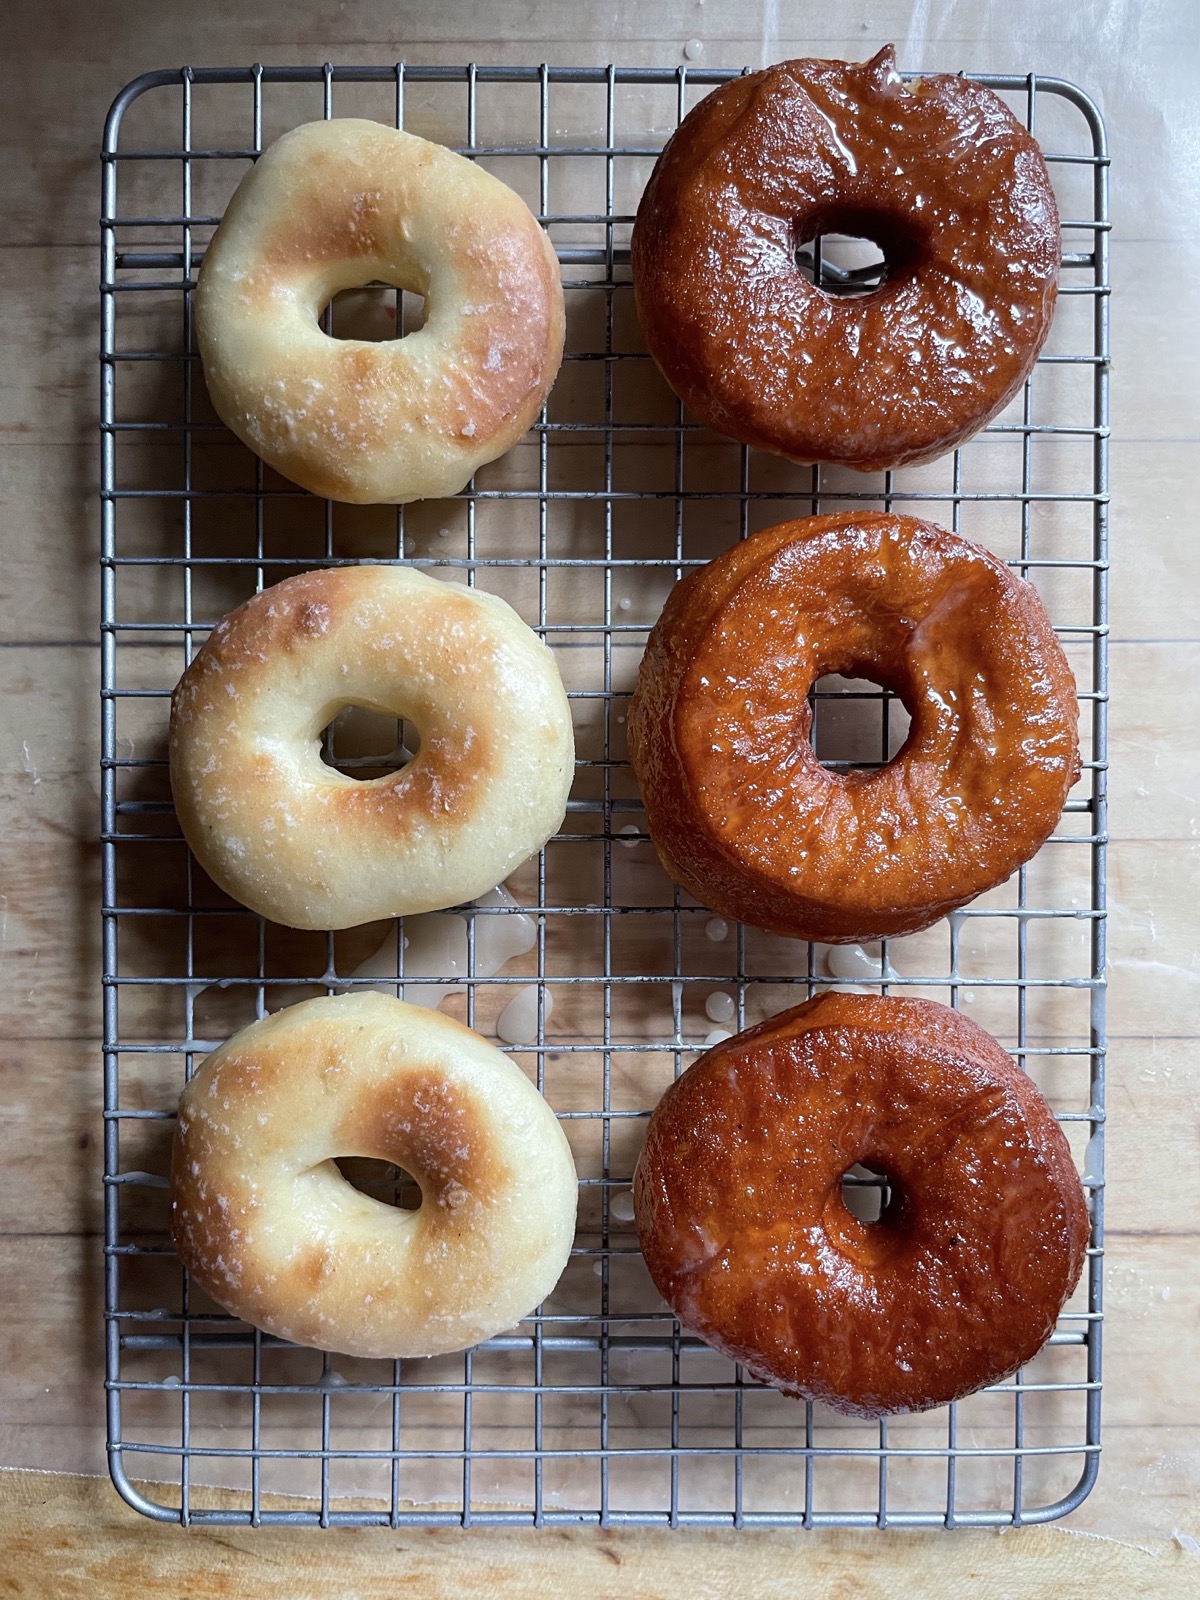 Two rows of yeast-raised doughnuts on a cooling rack: air-fried on the left, fried in hot oil on the right.